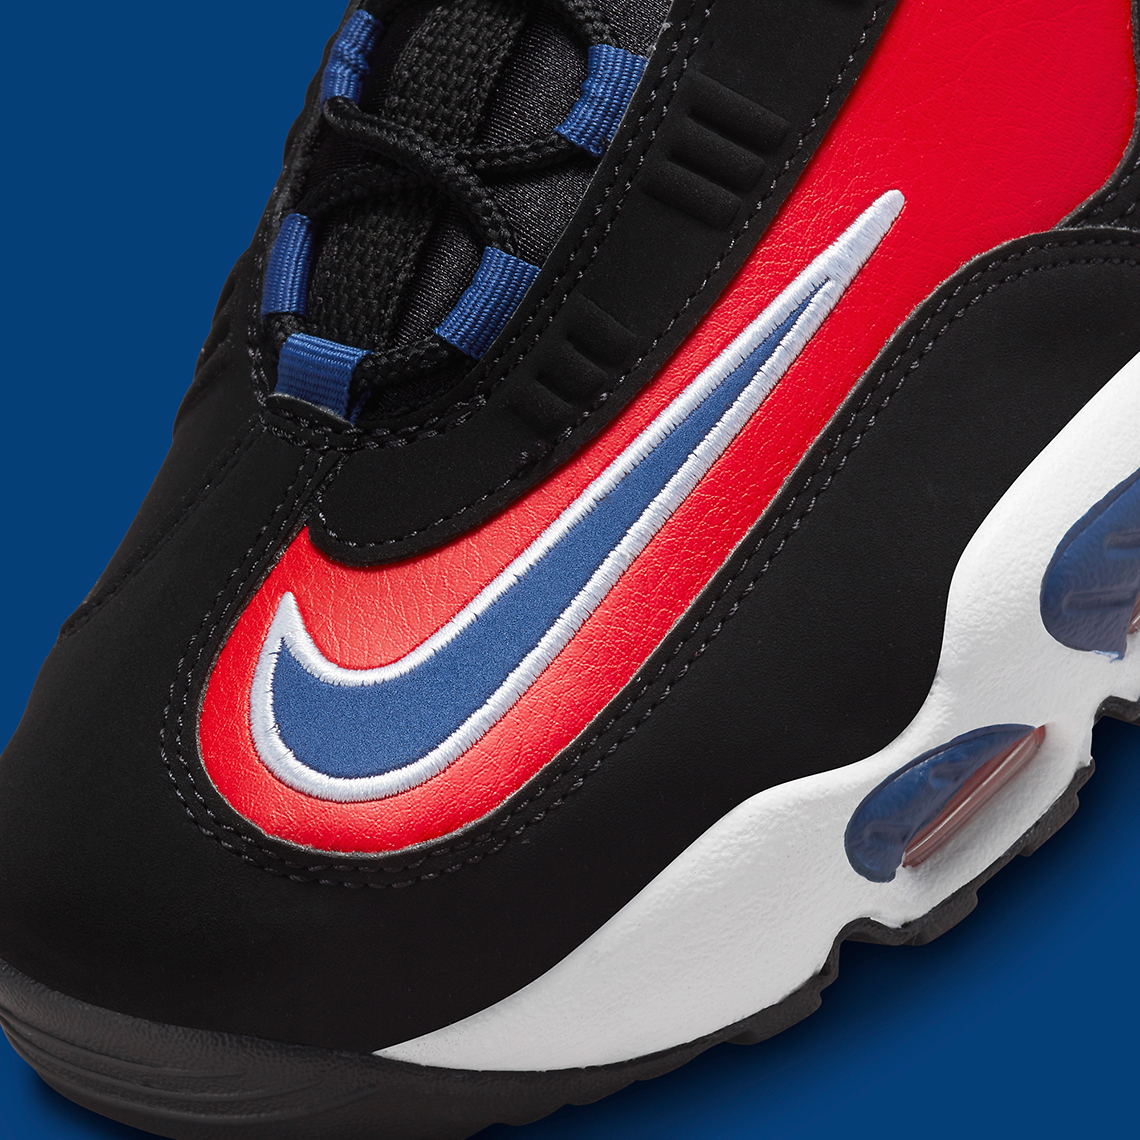 nike-air-griffey-max-1-navy-red-release-date-9.jpg